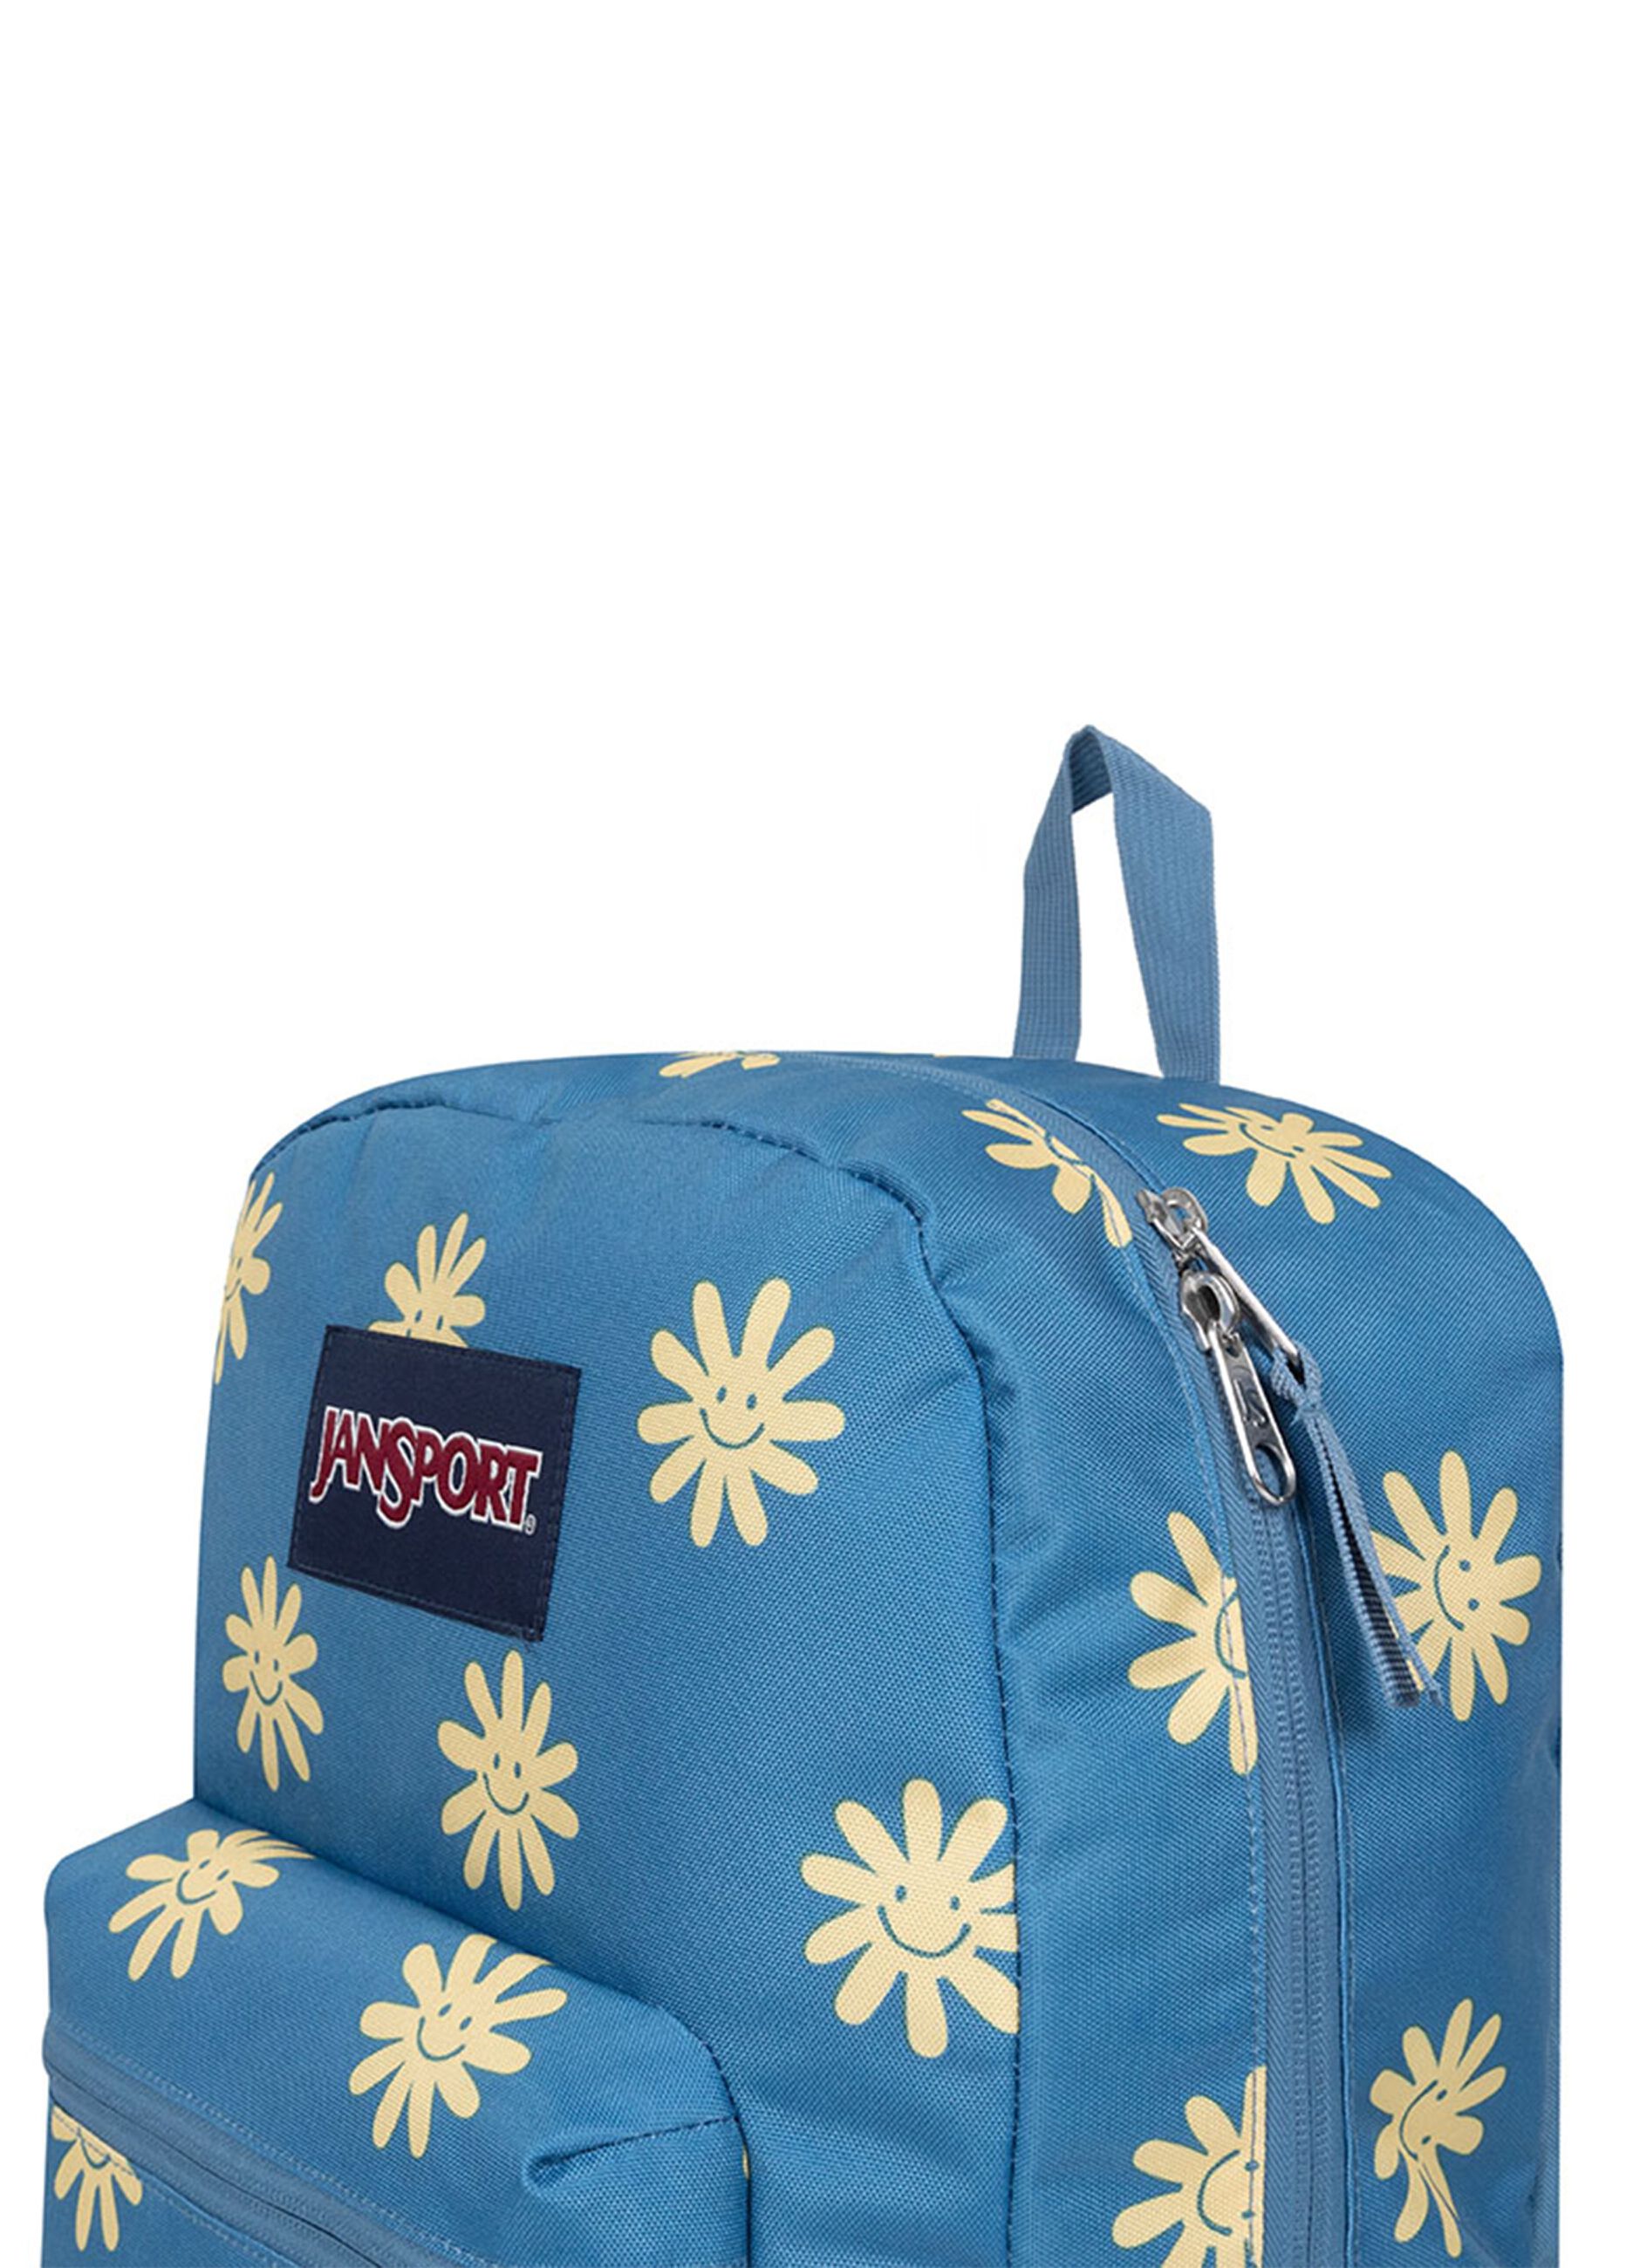 Backpack with daisies pattern